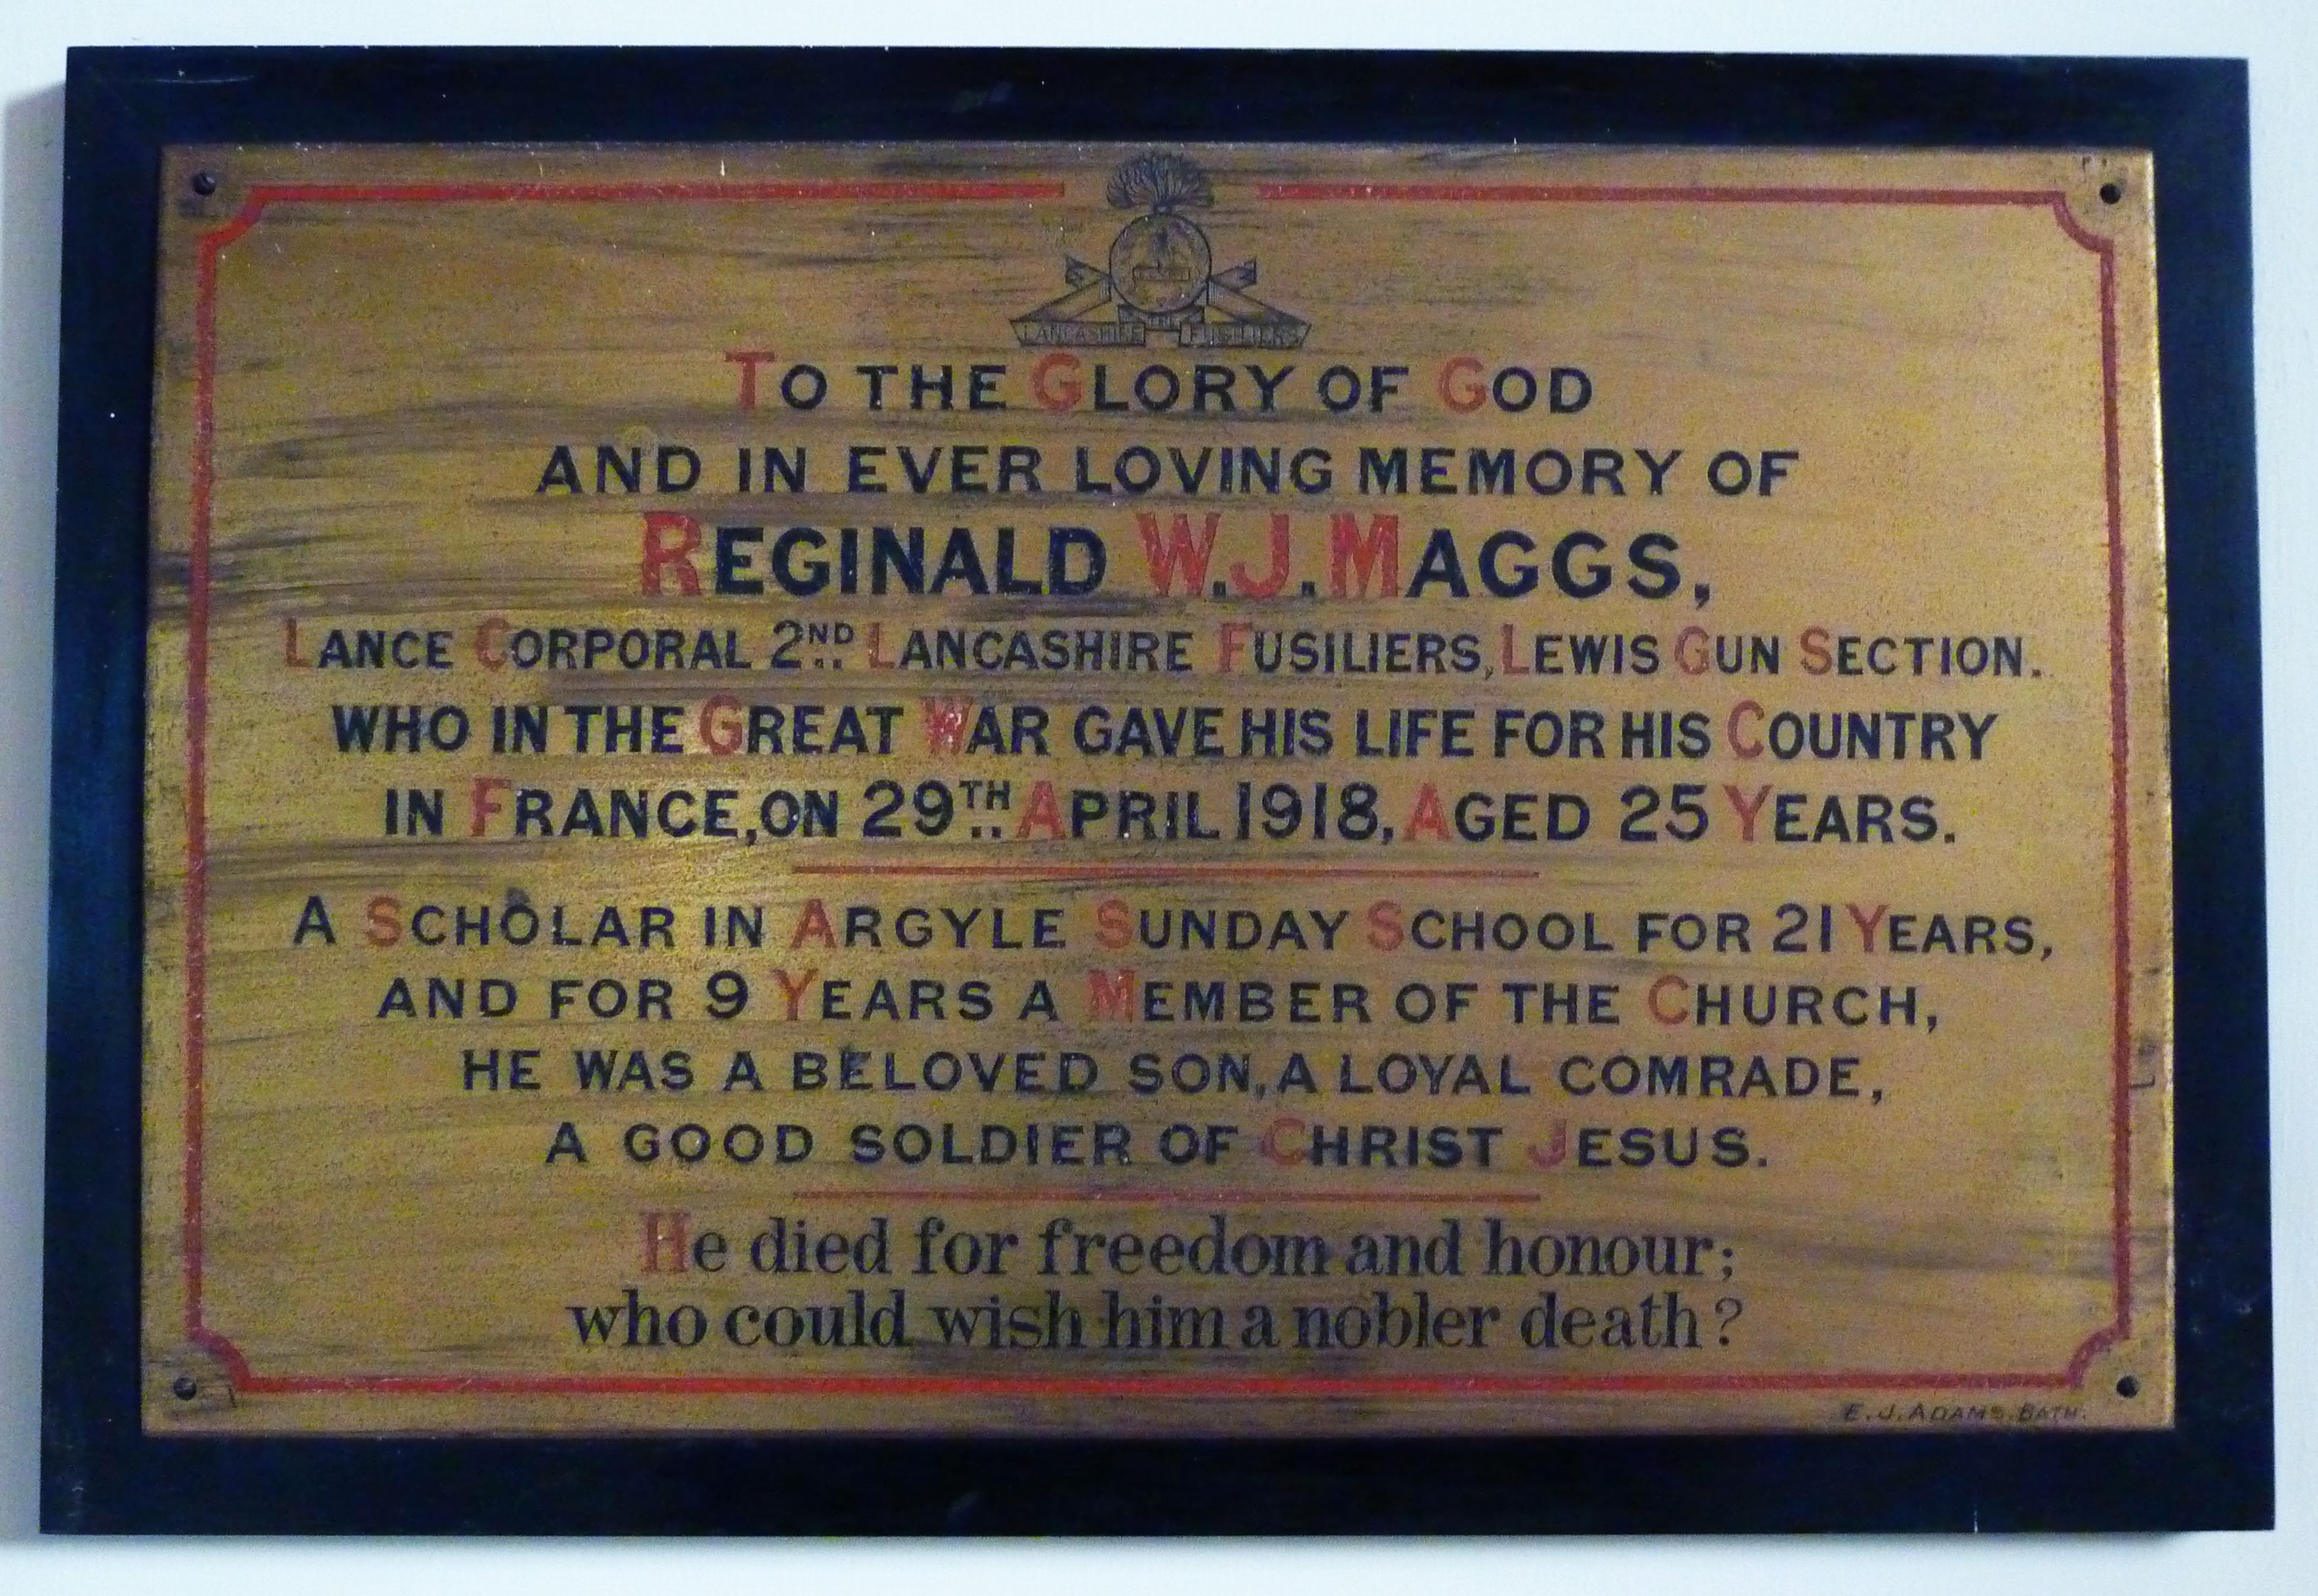 Memorial to Reginald Maggs in Argyle Church: To the glory of God / and in ever loving memory of REGINALD W.J. MAGGS, Lance Corporal 2nd  Lancashire Fusiliers, Lewis Gun Section, who in the Great War gave his life for his Country in France, on 29th April 1918, aged 25 years. A scholar in Argyle Sunday School for 21 years, and for 9 years a member of the Church, he was a beloved son, a loyal comrade, a good soldier of Christ Jesus. He died for freedom and honour; who could wish him a nobler death?